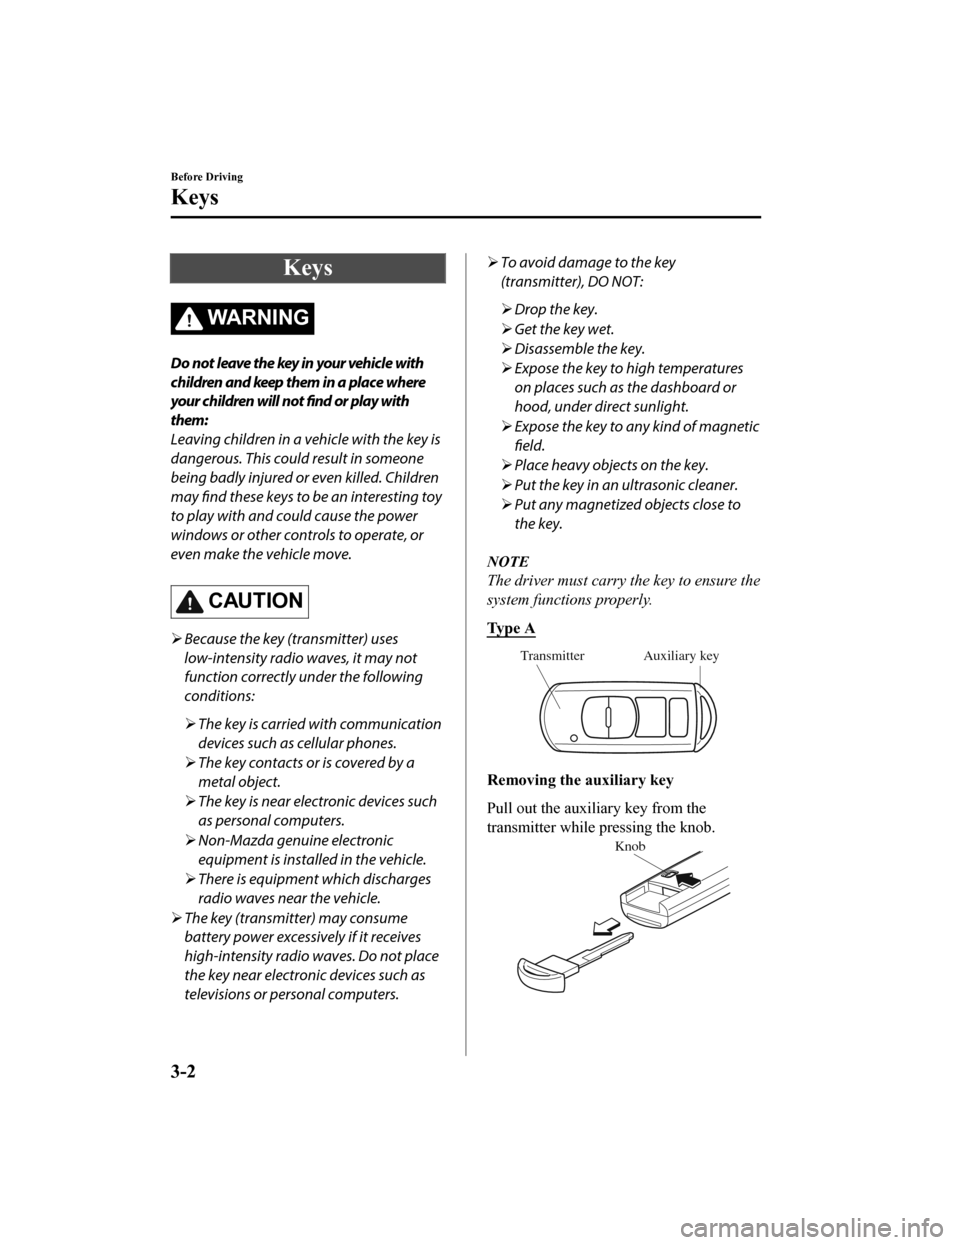 MAZDA MODEL MX-5 2020  Owners Manual (in English) Keys
WARNING
Do not leave the key in your vehicle with
children and keep them in a place where
your children will not find or play with
them:
Leaving children in a vehicle with the key is
dangerous. T